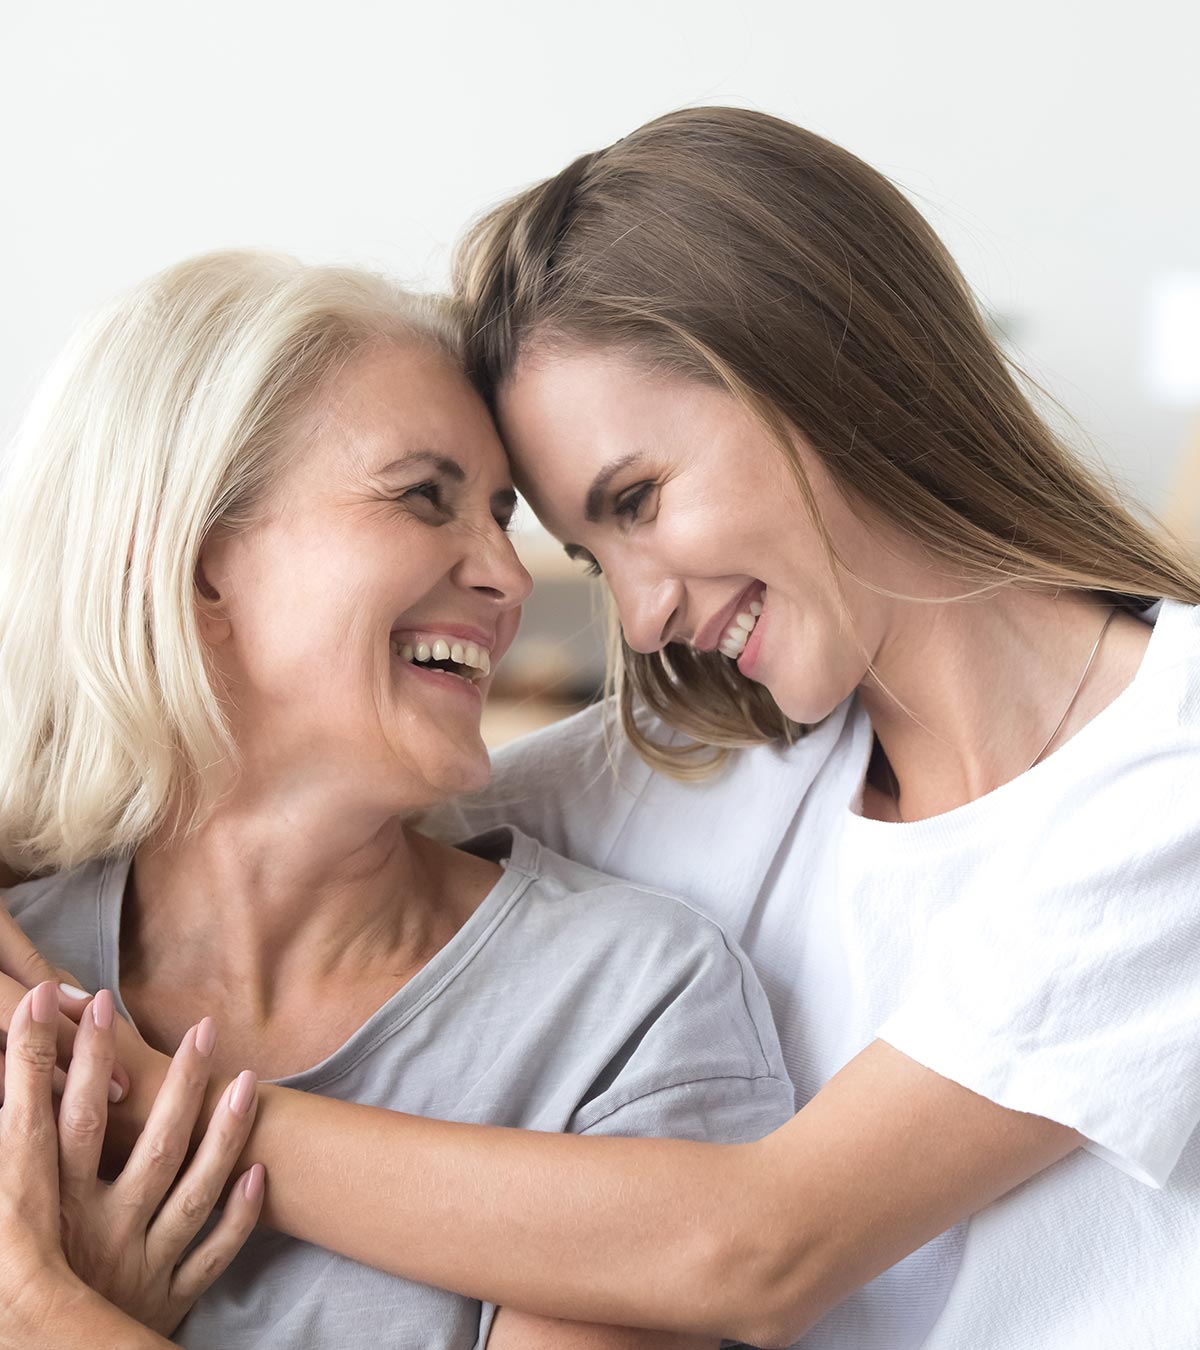 Douterxvideos - Mother-Daughter Relationship: Importance And Ways To Improve